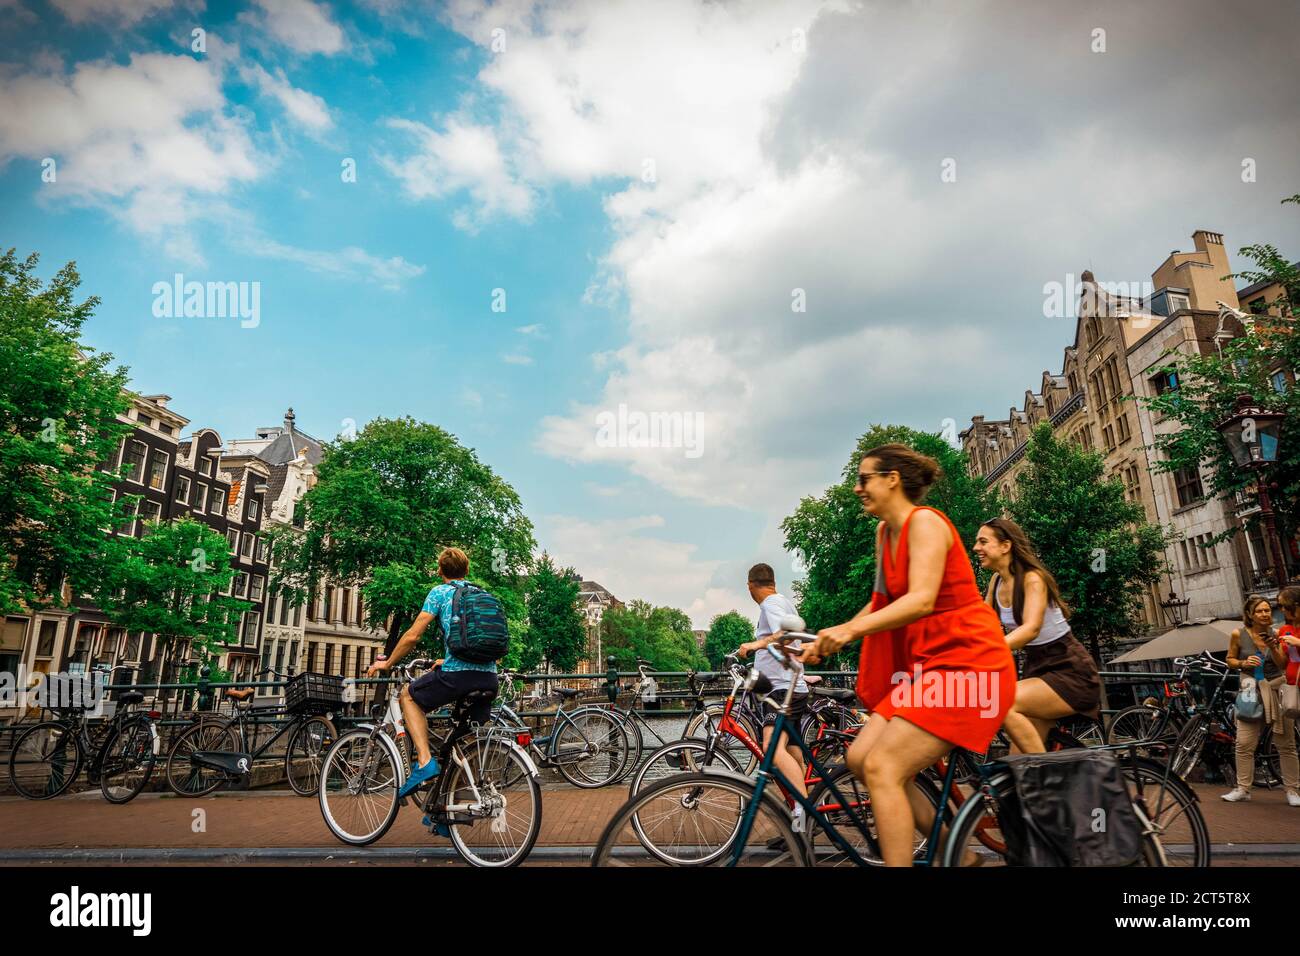 Riding a Bike on Summer in Amsterdam Stock Photo